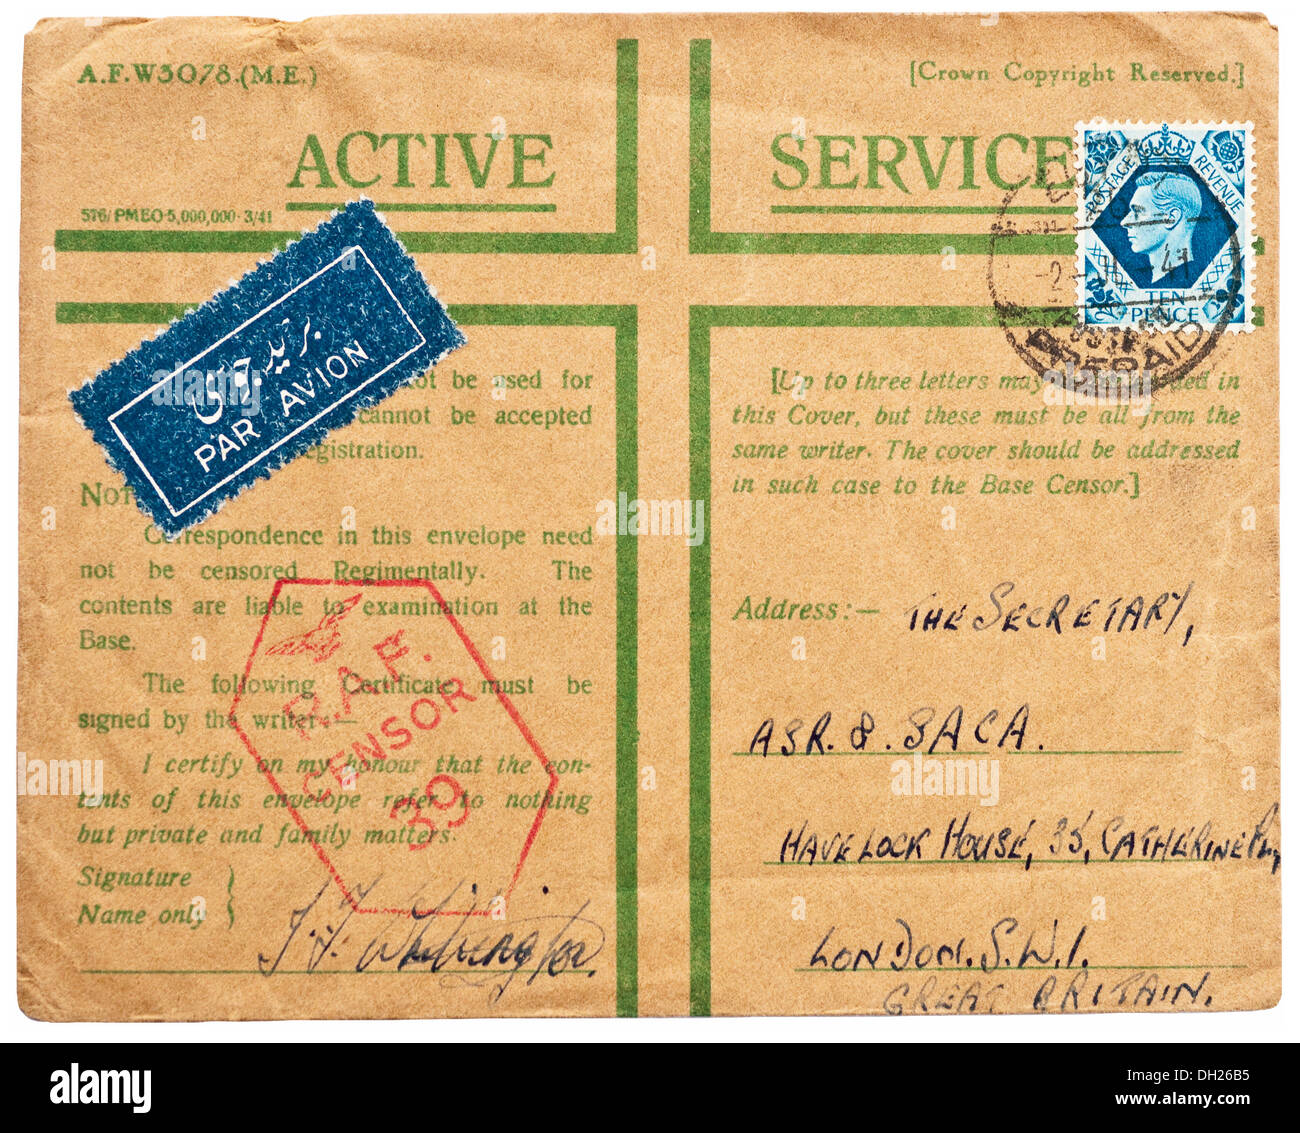 1943 British wartime censored air-mail 'Active Service' envelope with King George VI ten pence stamp to the UK from Egypt. Stock Photo